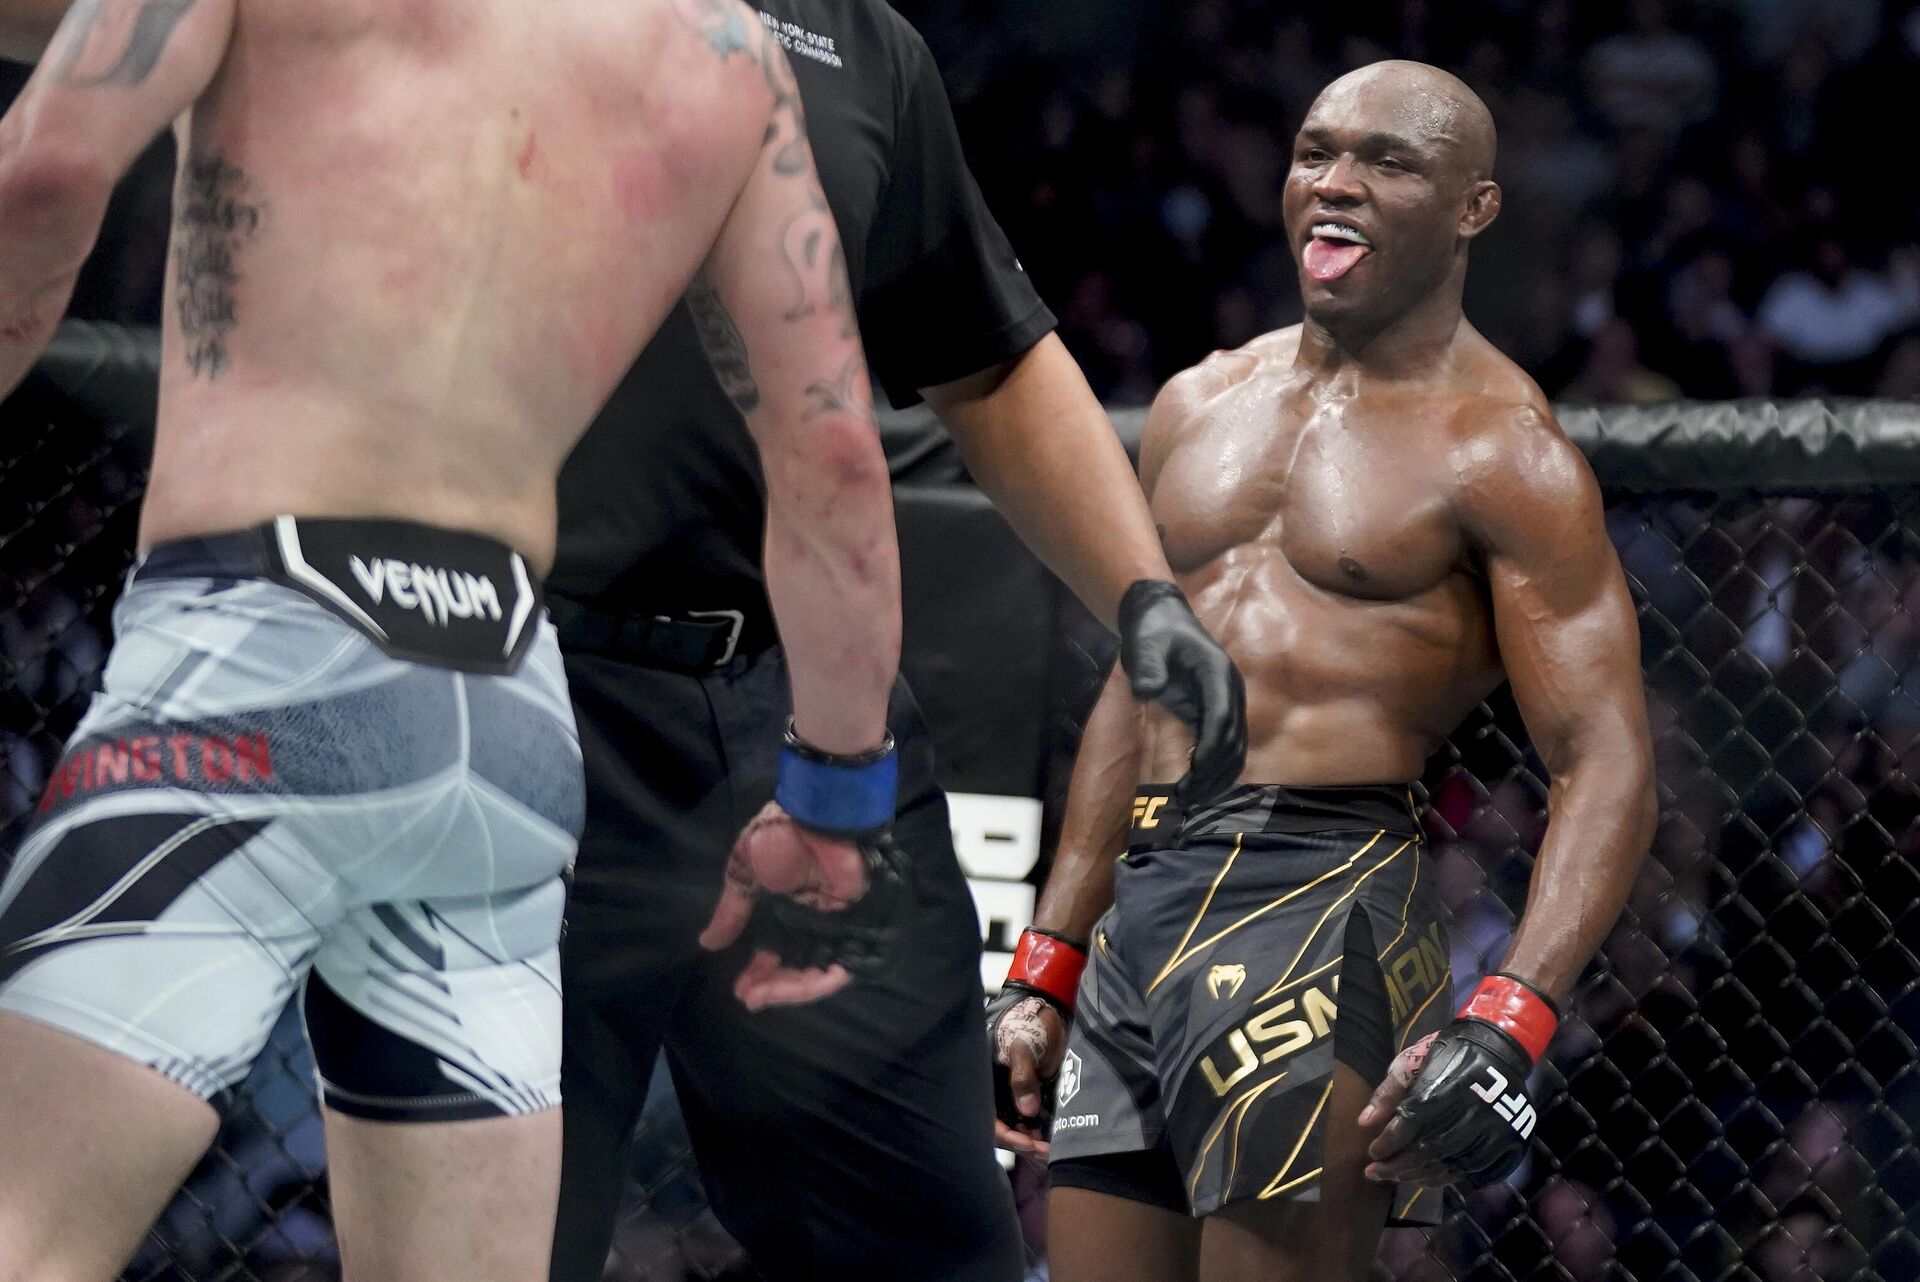 Kamaru Usman reacts against Colby Covington during a welterweight mixed martial arts championship bout at UFC 268, Sunday, Nov. 7, 2021, in New York - Sputnik International, 1920, 17.01.2023